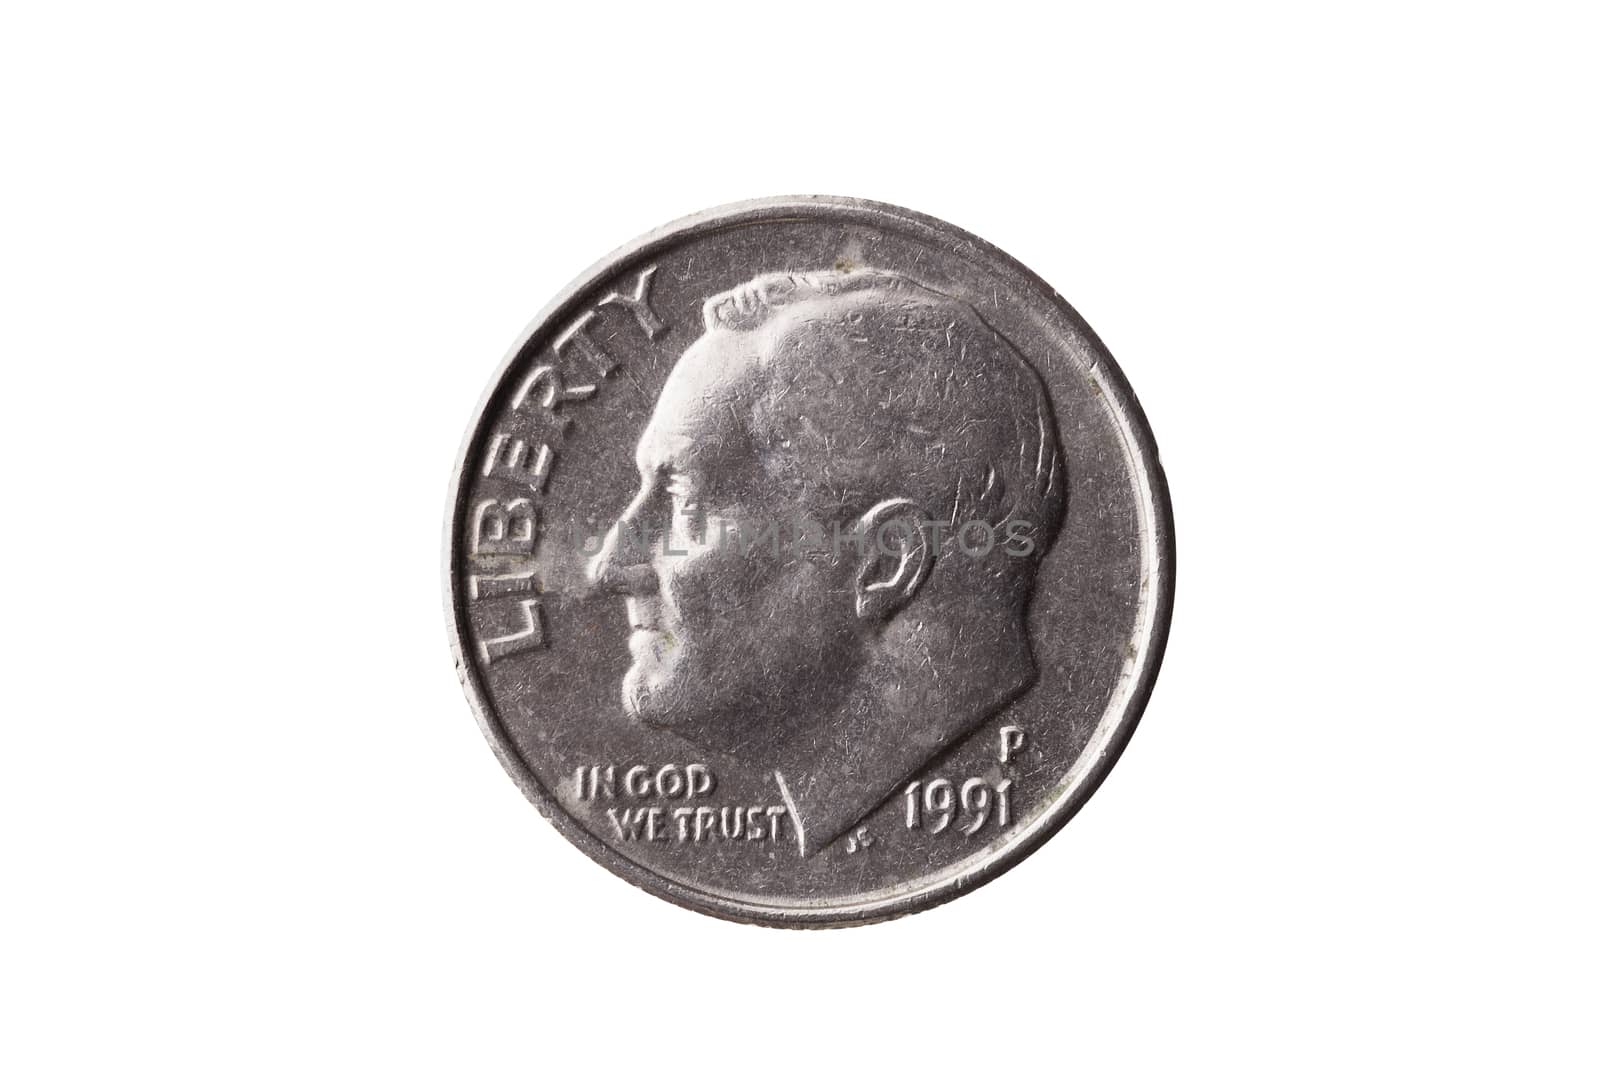 USA dime nickel coin (10 cents) with a portrait image of Franklin D Roosevelt cut out and isolated on a white background